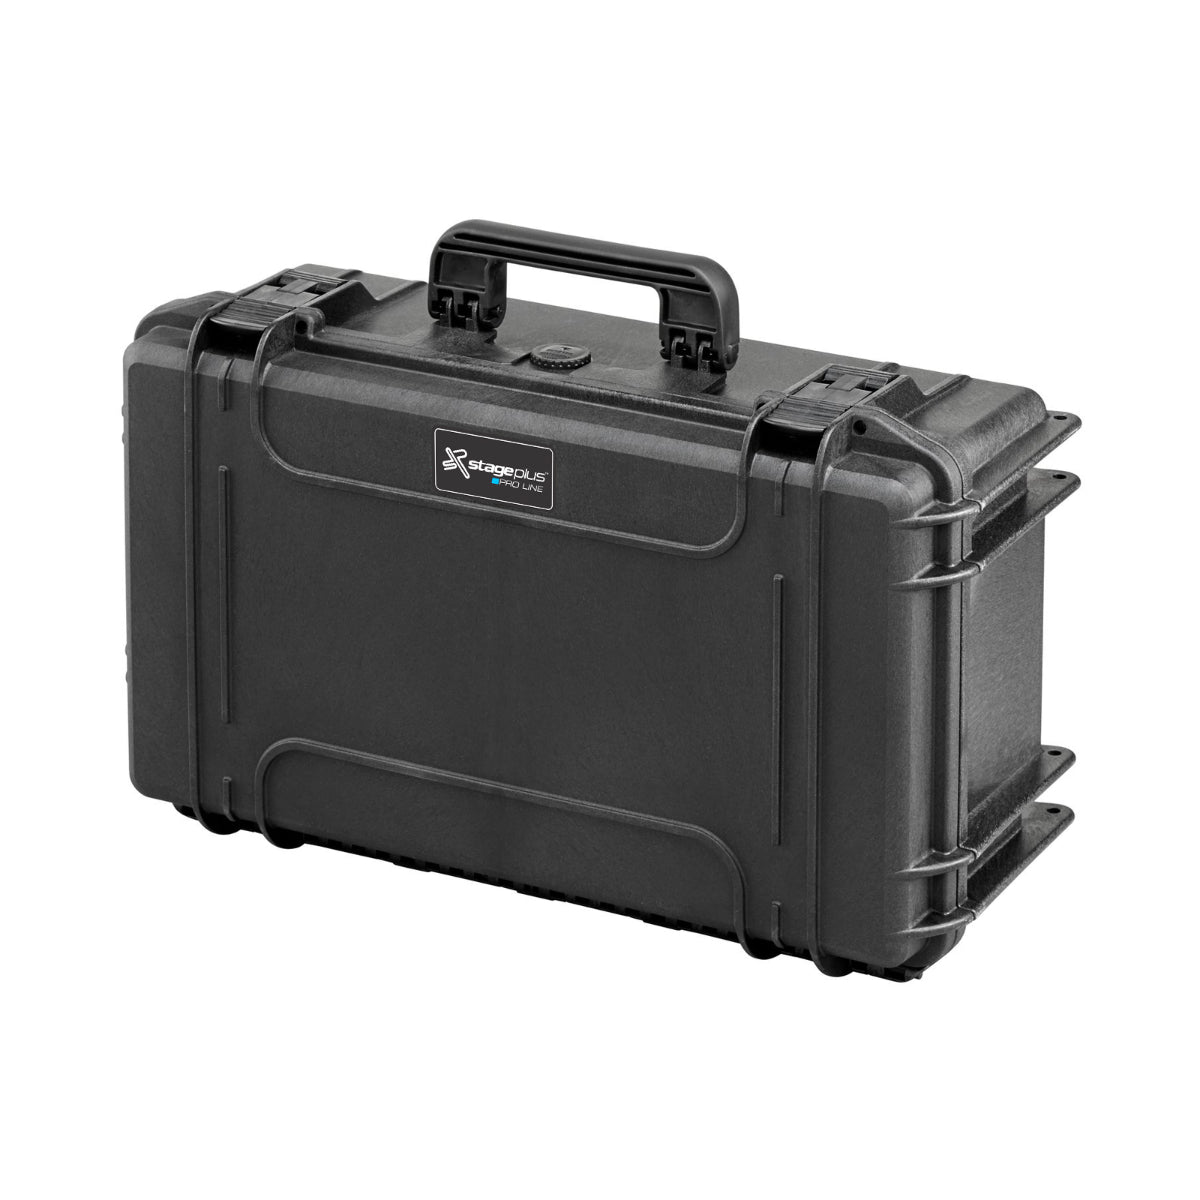 SP PRO 520CAMORG Black Carry Case, Padded Dividers + Lid Organizer, ID: L520xW290xH200mm